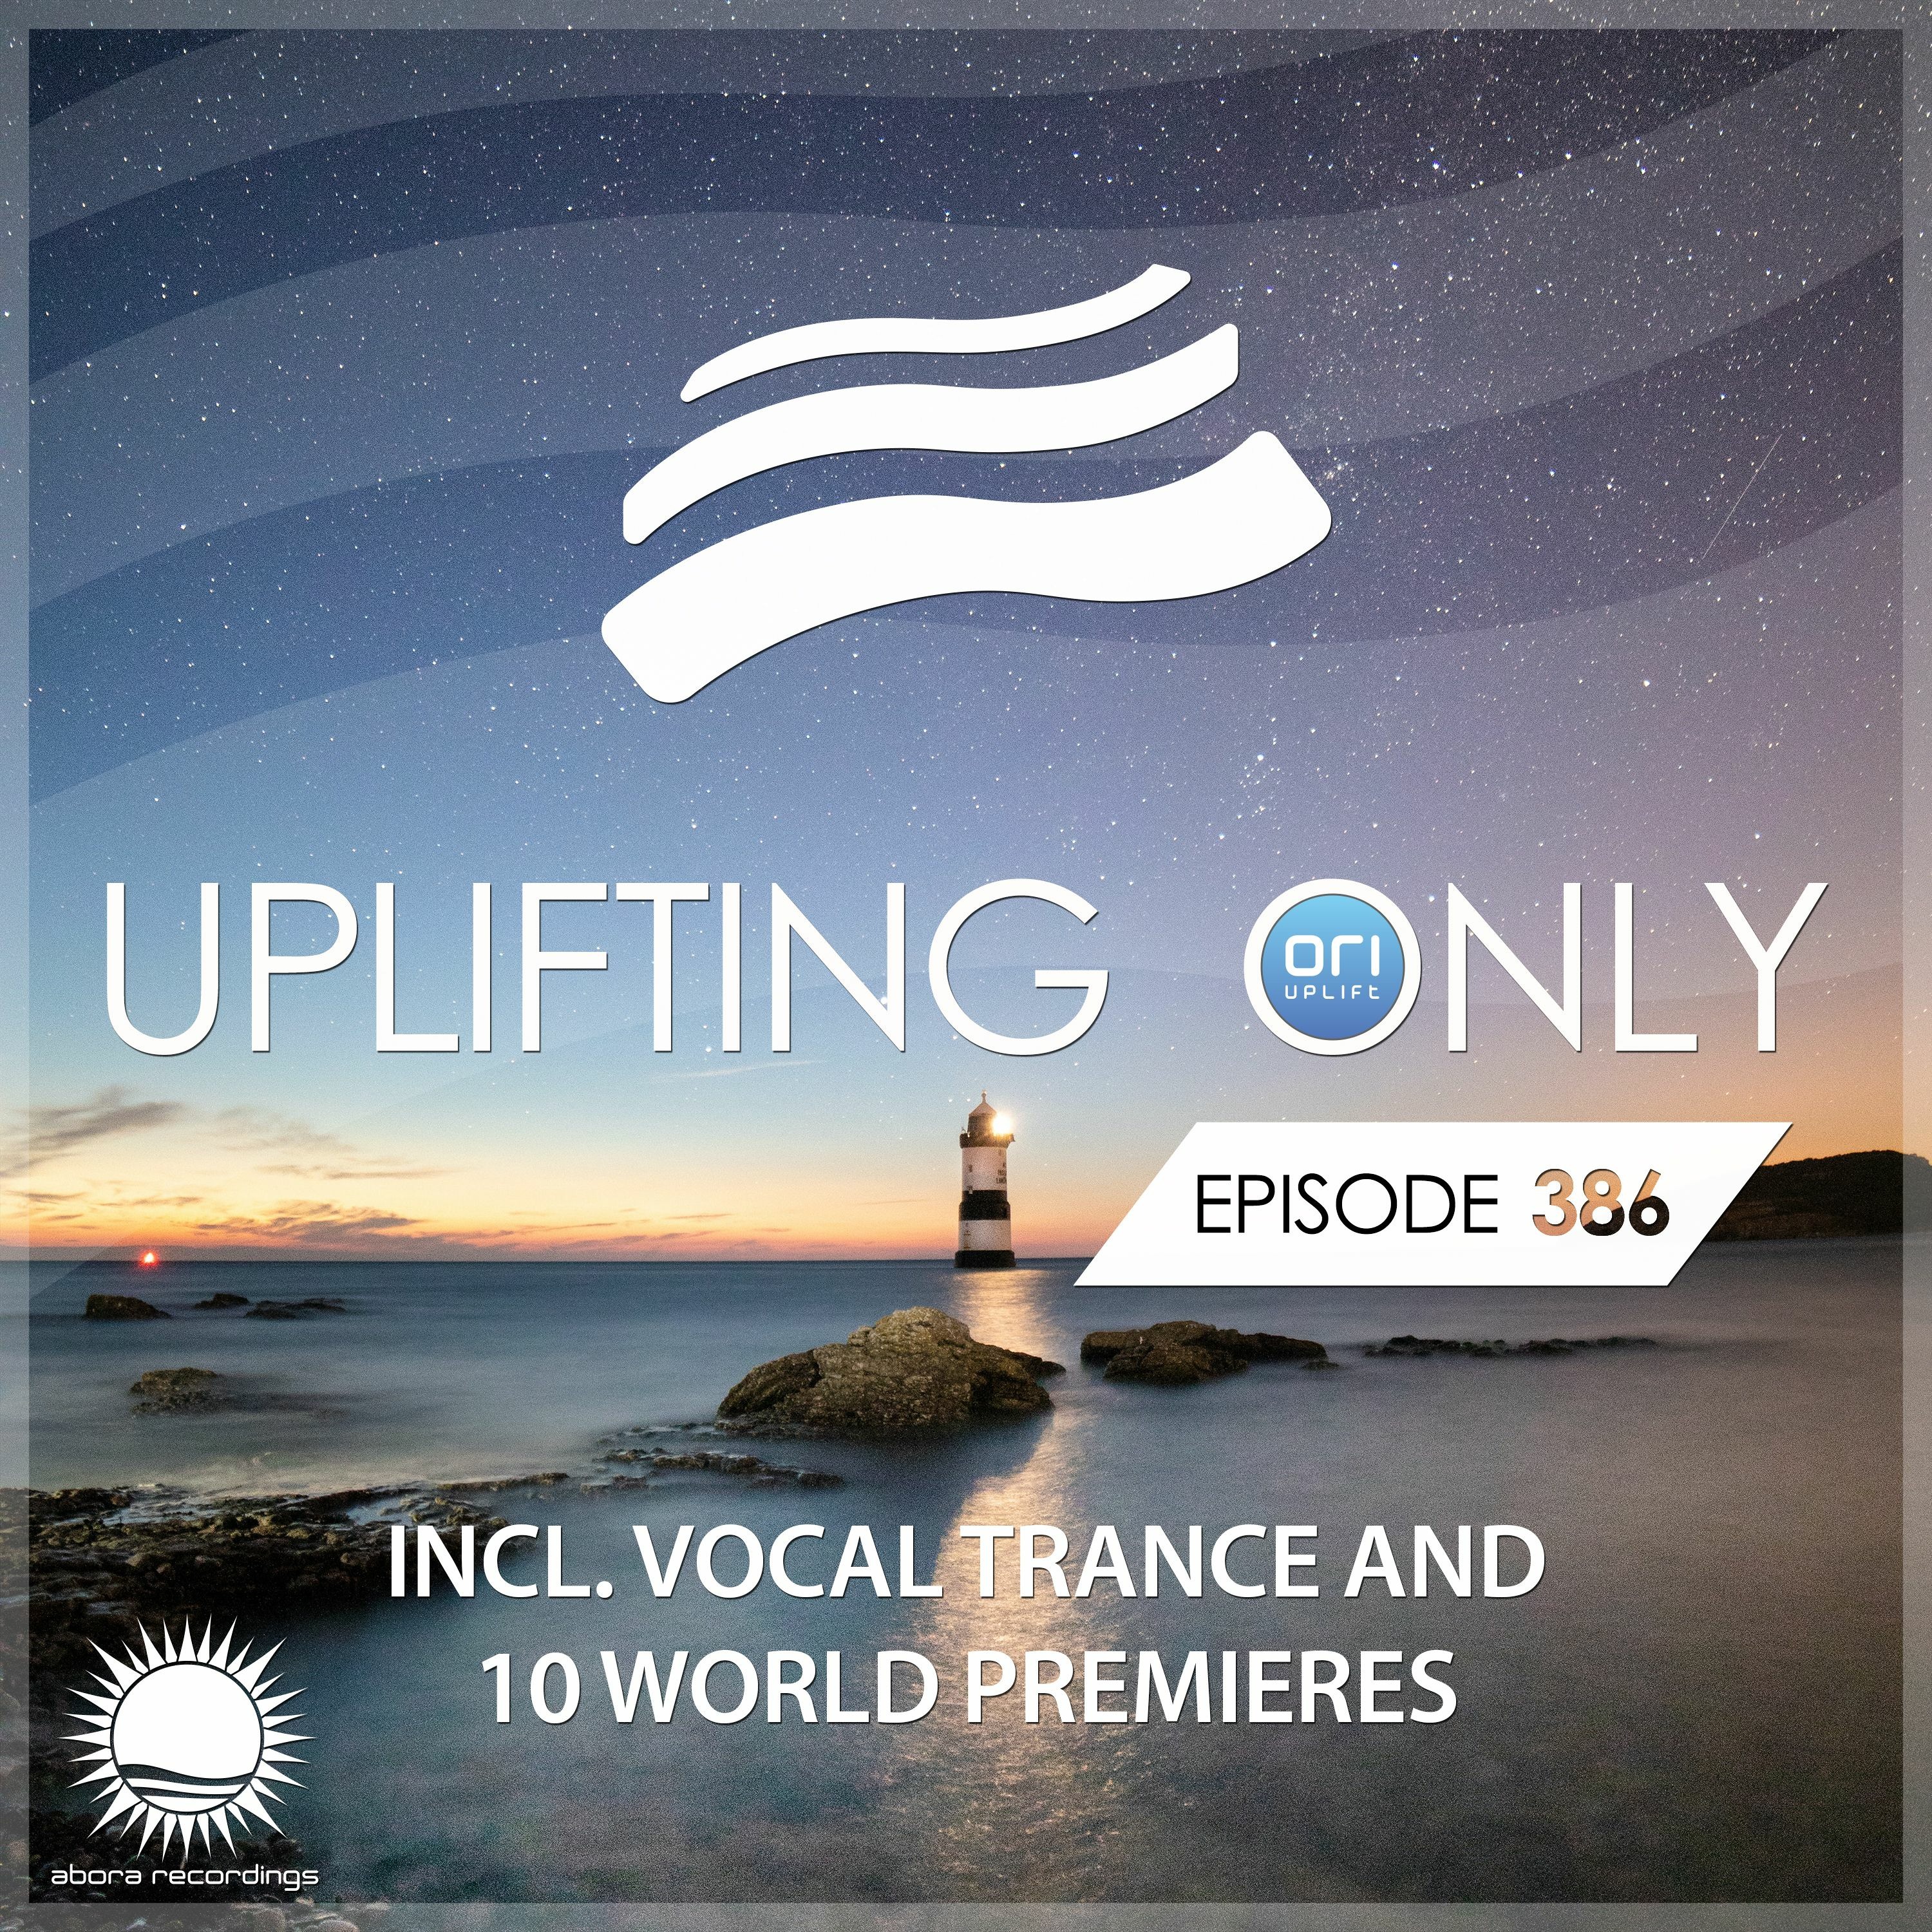 Uplifting Only 386 (July 2, 2020) [incl. Vocal Trance]